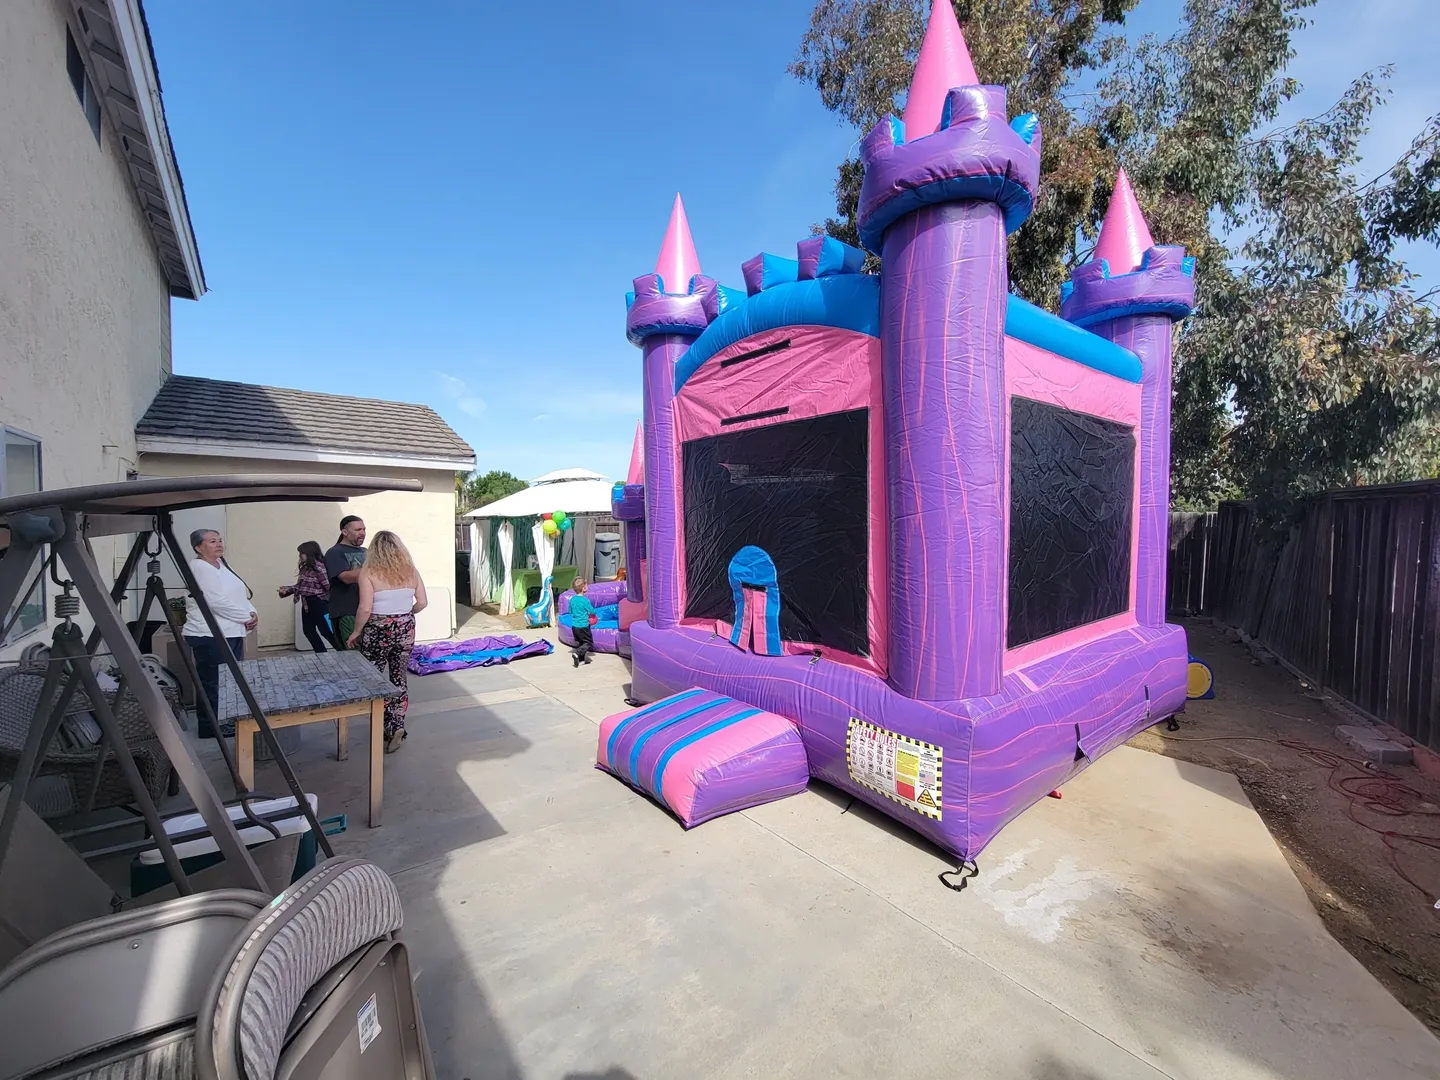 A purple and pink inflatable castle with people in the background.